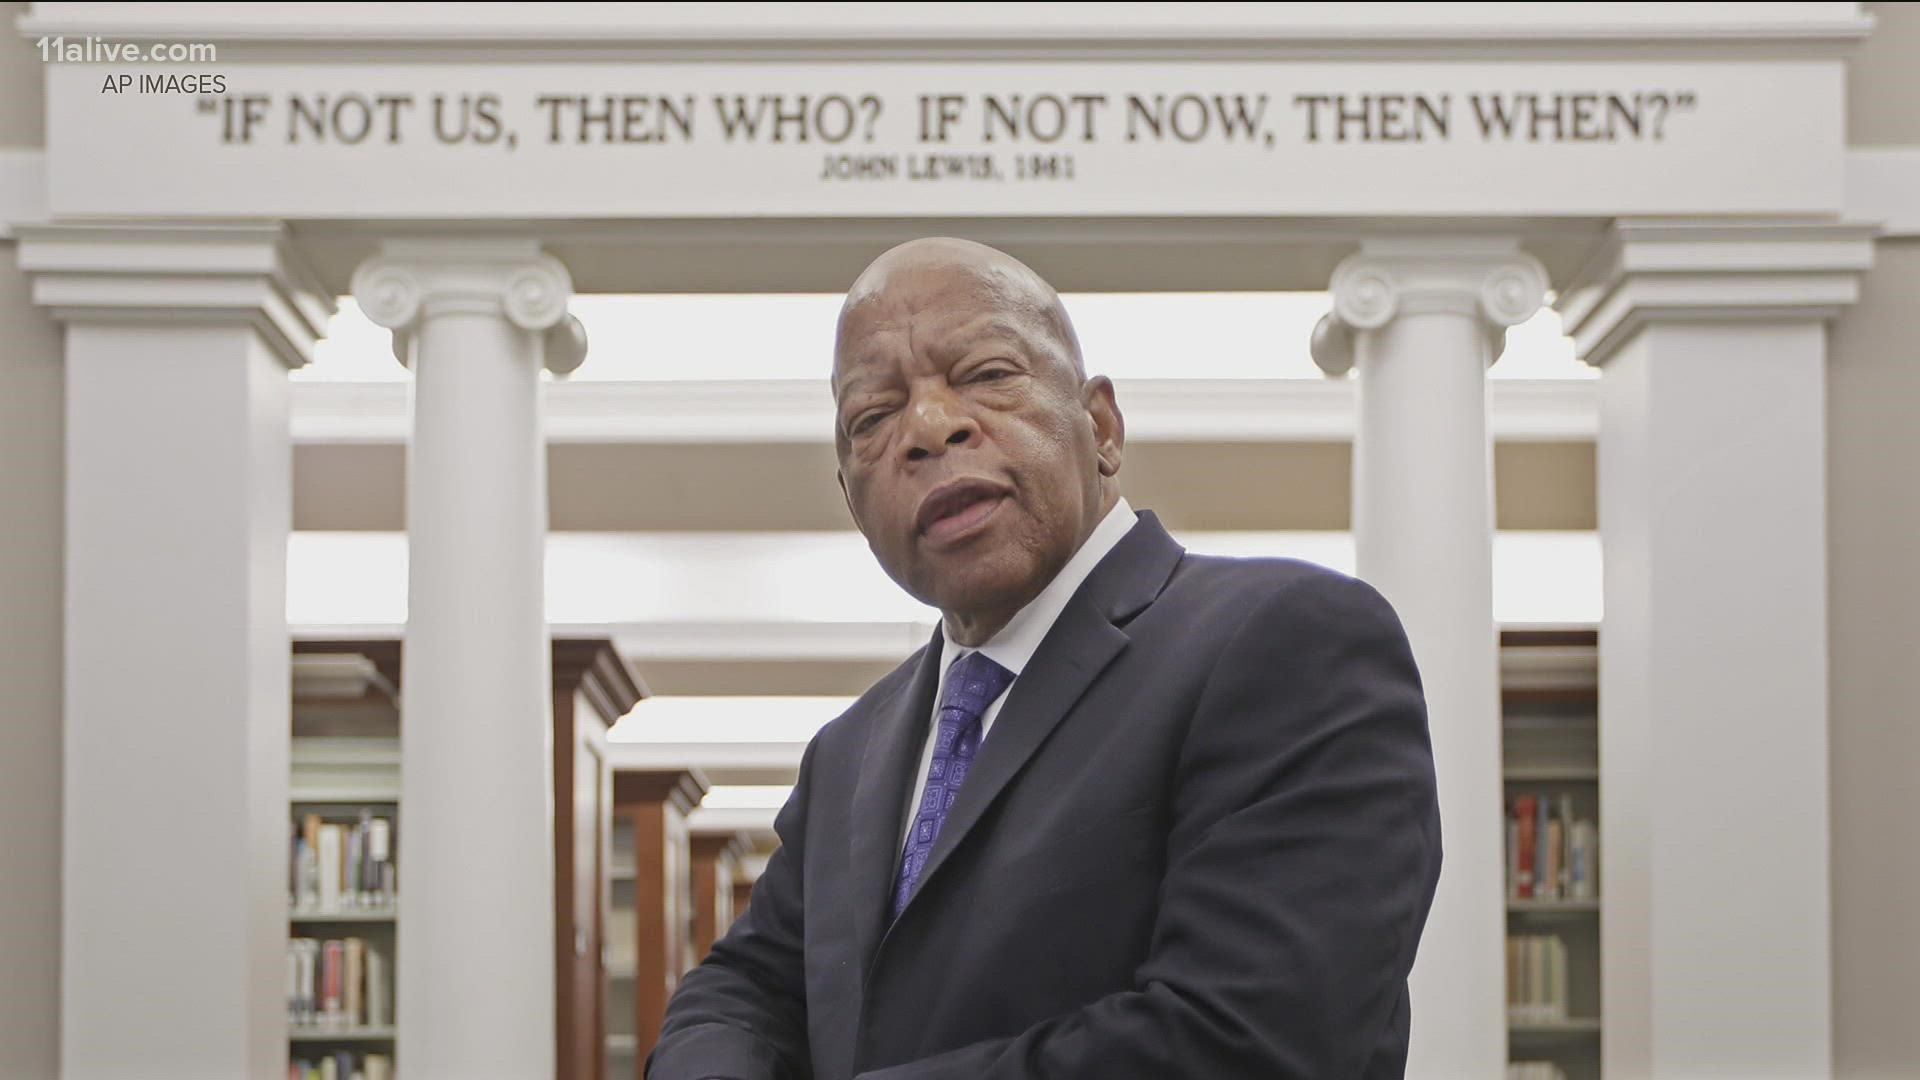 It's a long-lasting tribute to the late Civil Rights legend Congressman John Lewis.